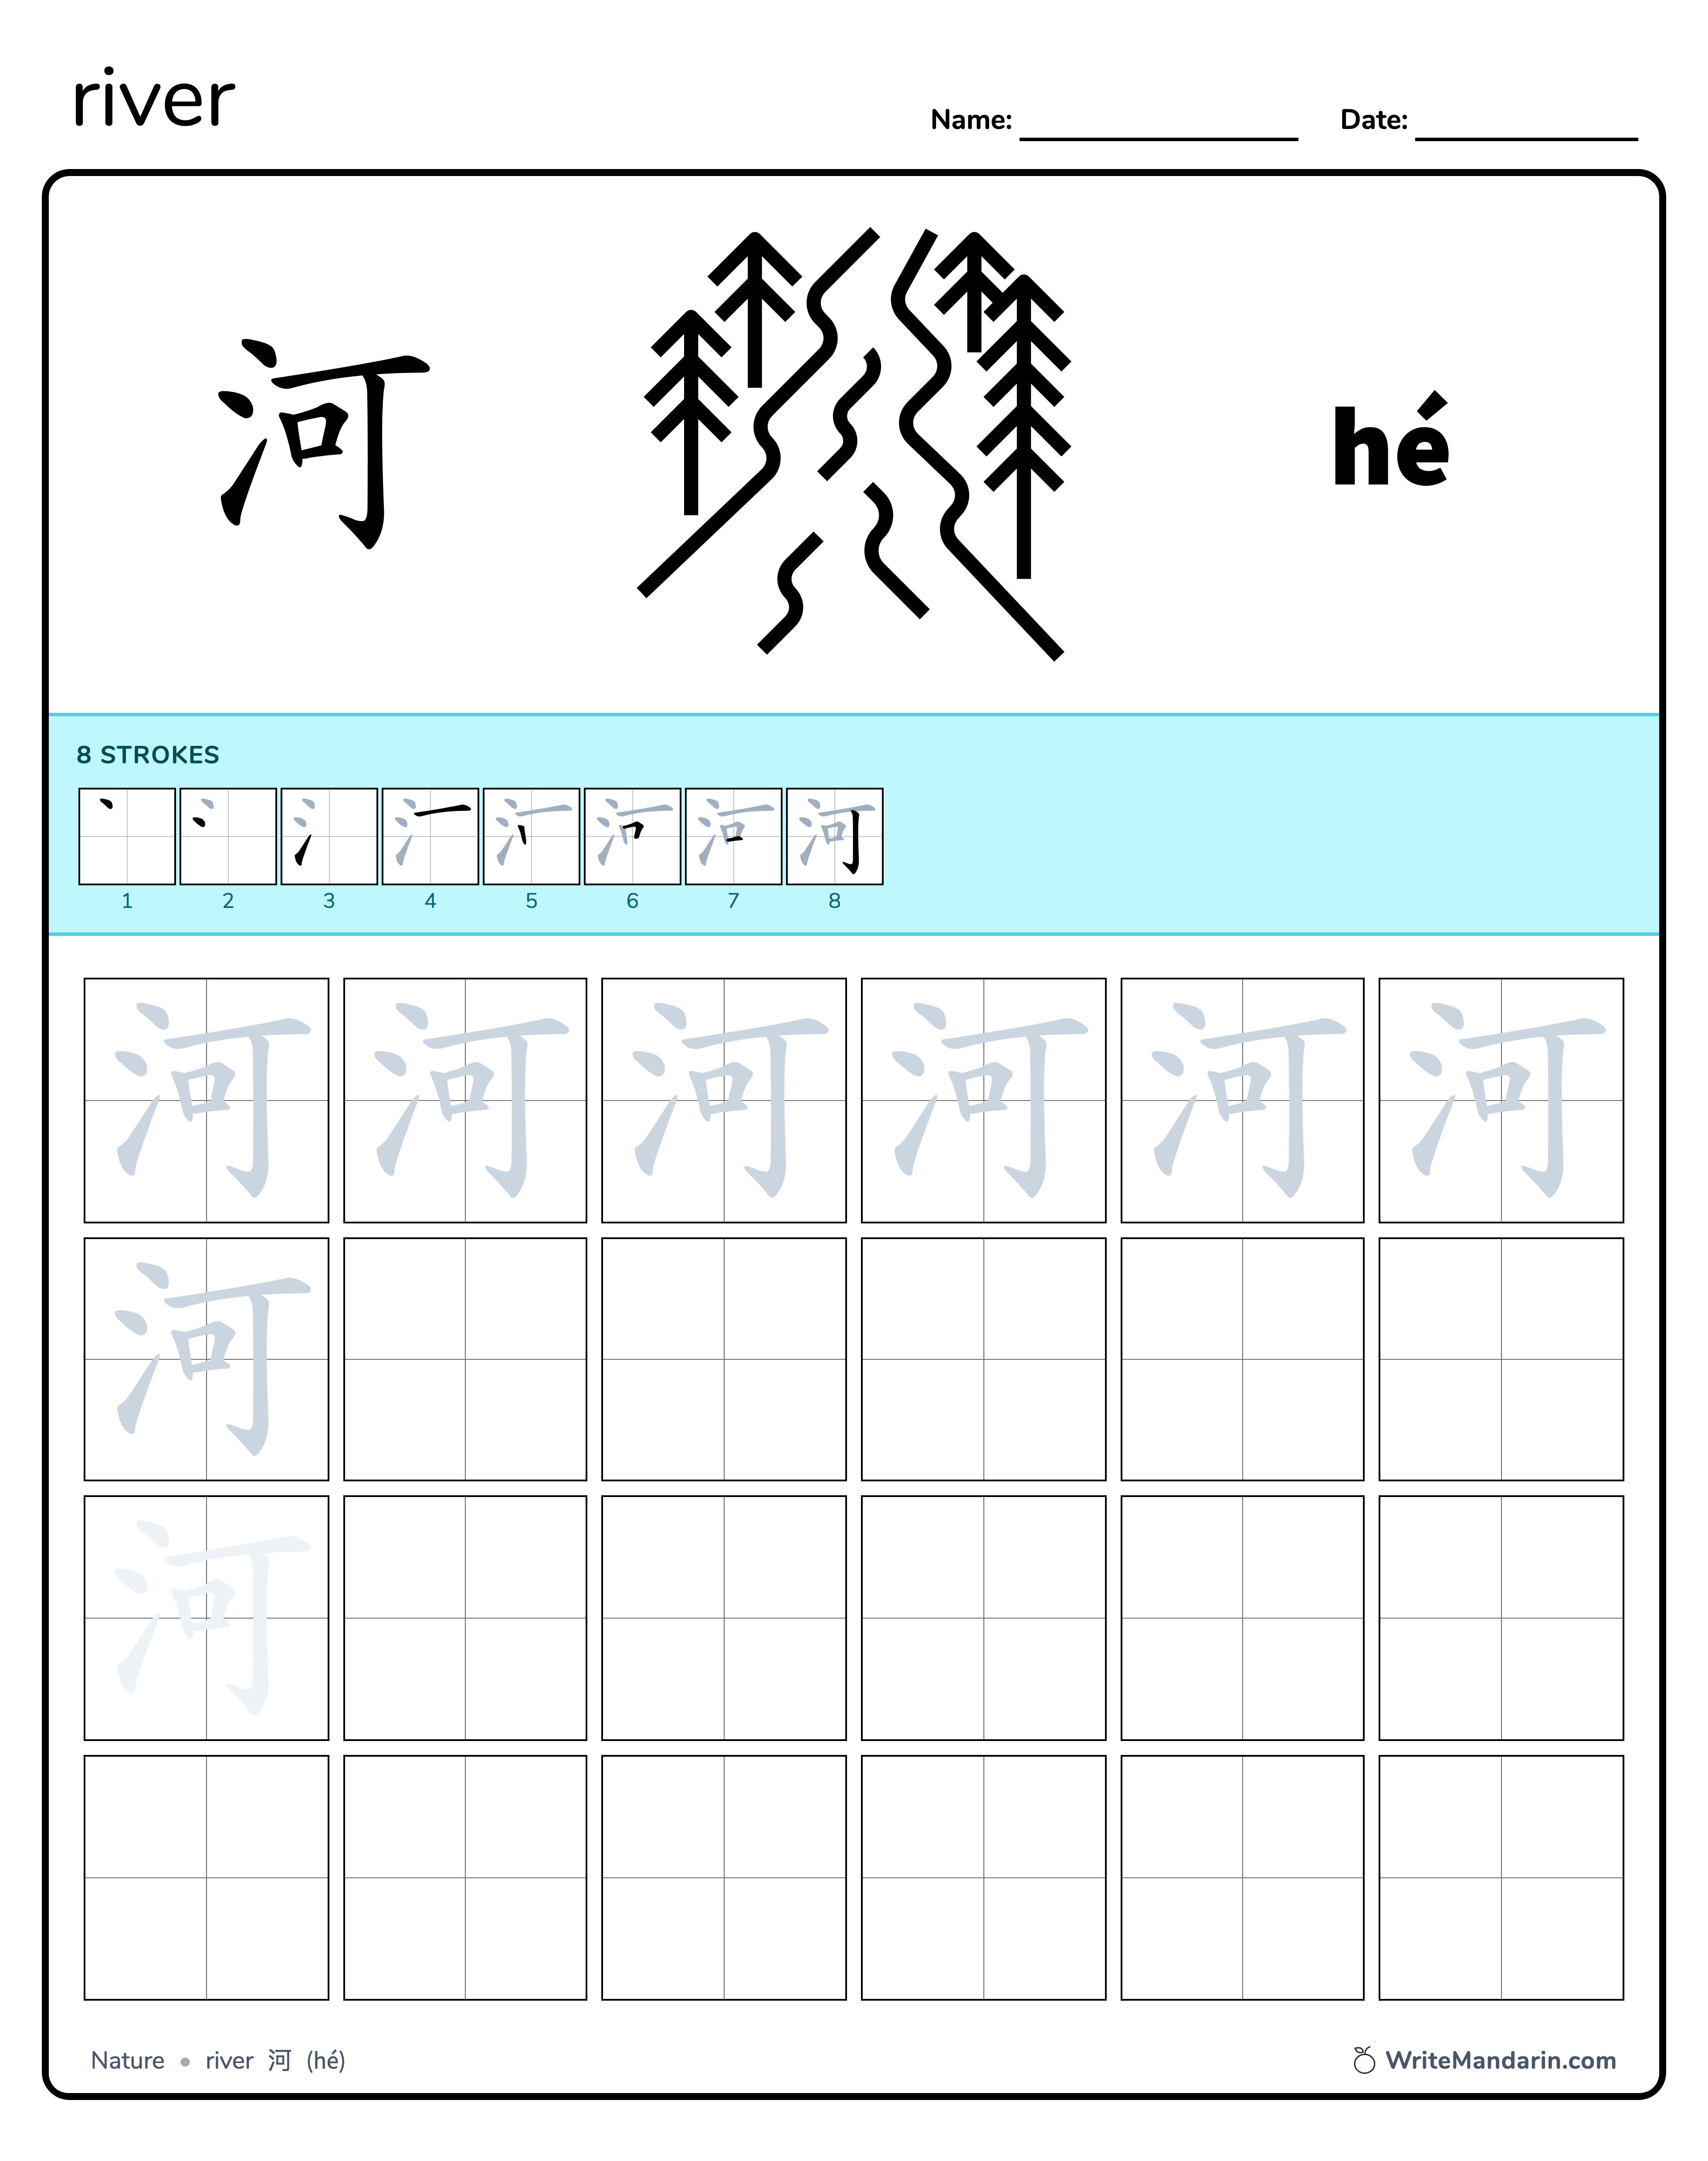 Preview image of related writing worksheet